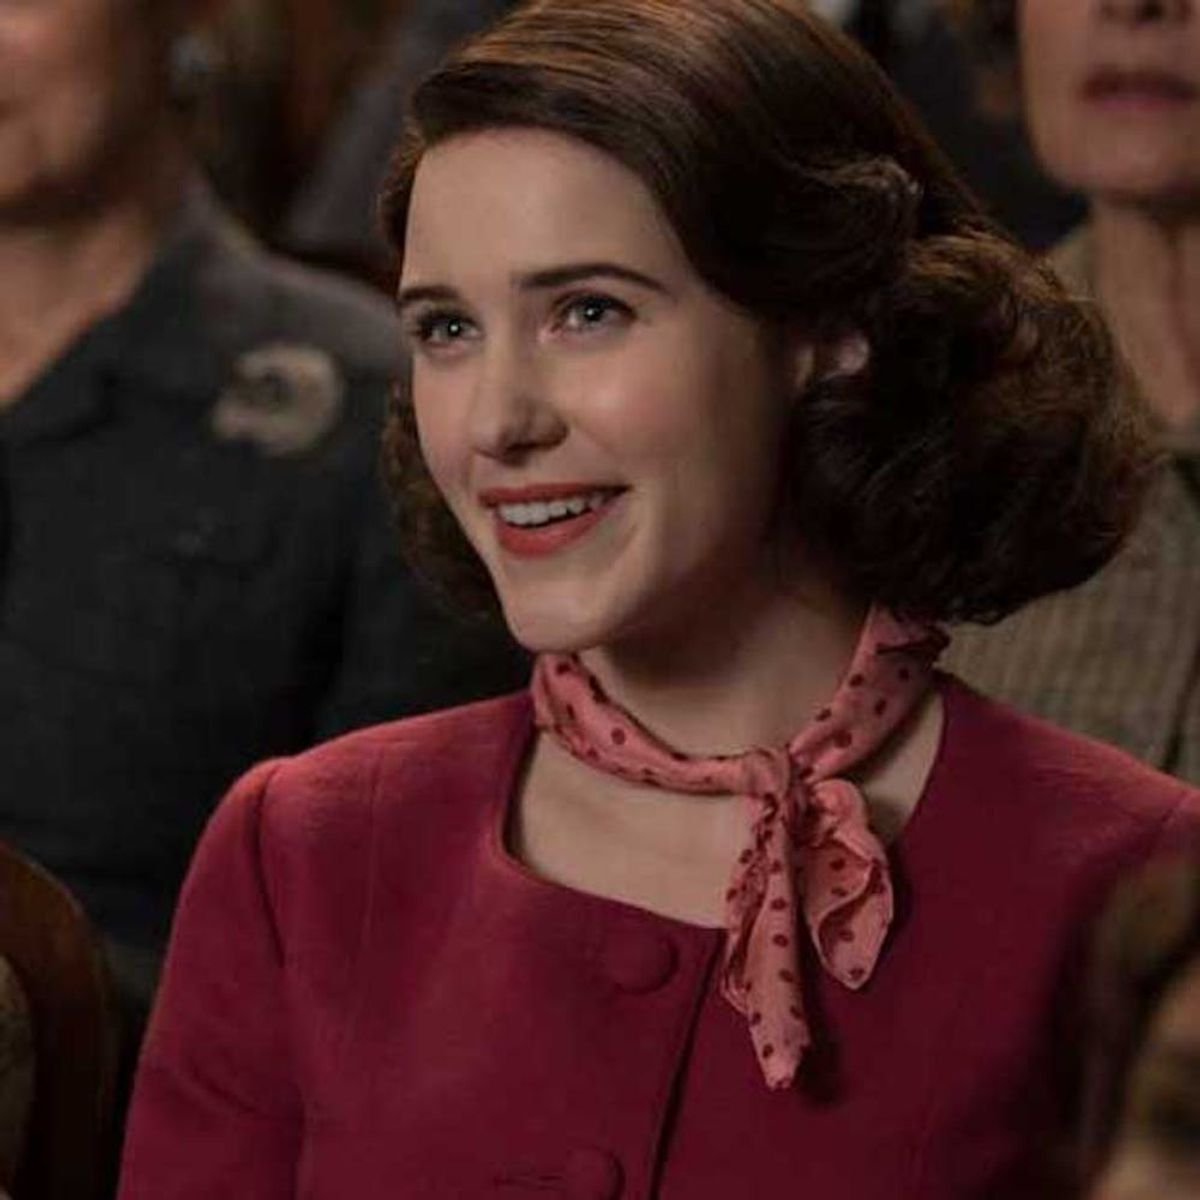 ‘The Marvelous Mrs. Maisel’ Episode 4 Recap: Midge Gets to Work (in More Ways Than One)